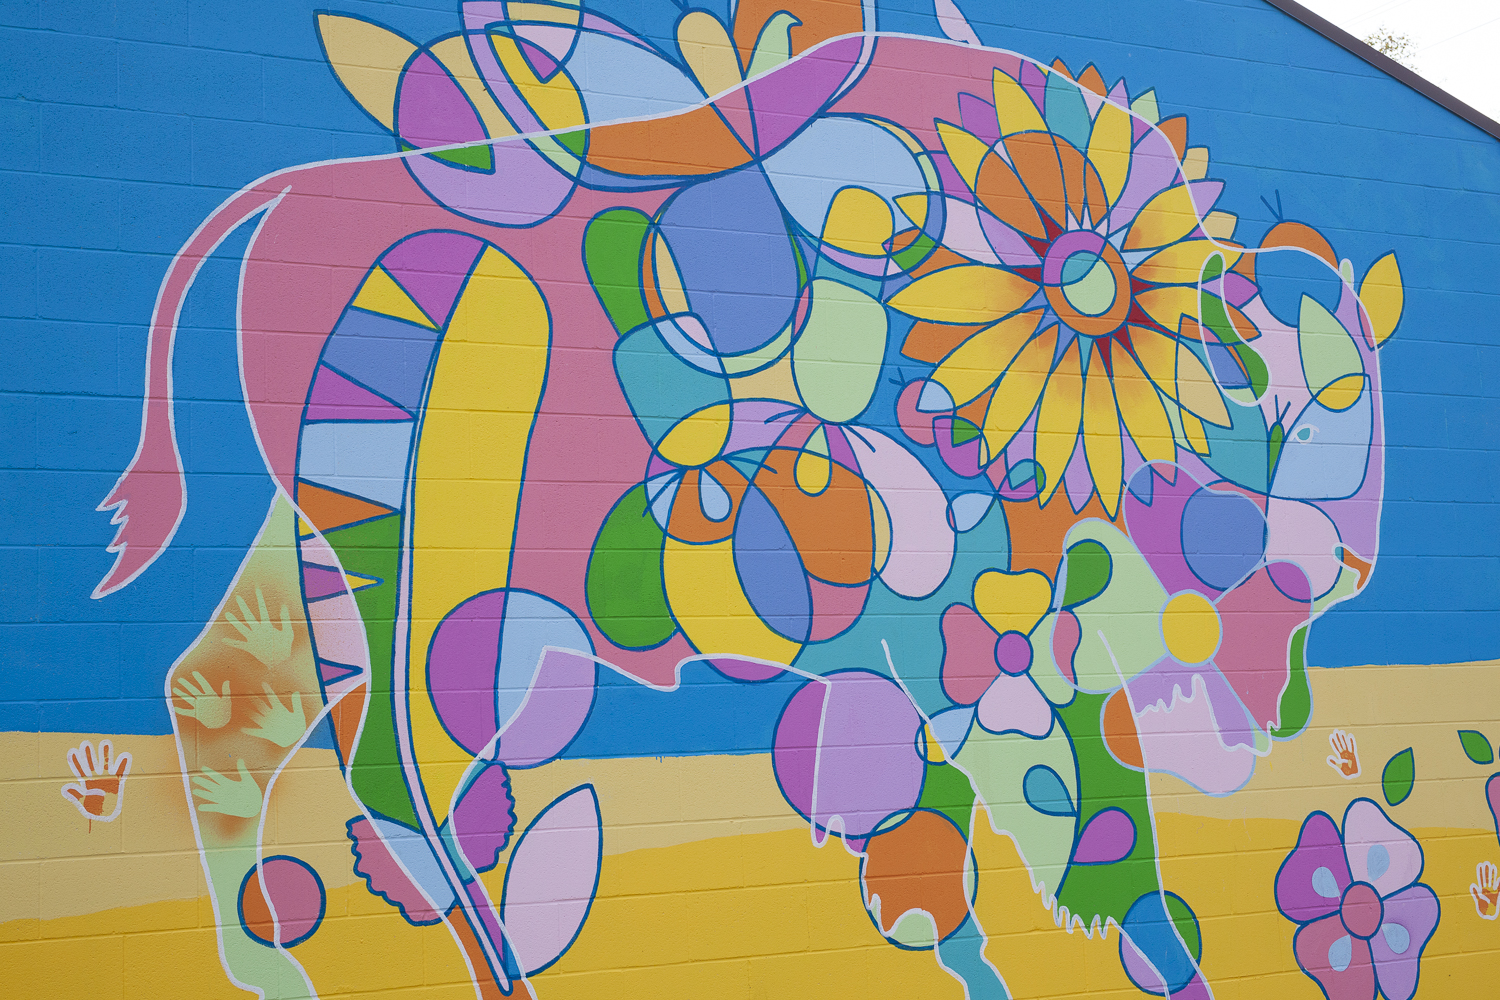 Close up photo of Bruno Canadien’s mural “Source of Life” - it features geometric shapes and motifs that form a buffalo - there are colours of pink, green, yellow, and purple on a blue & yellow background.